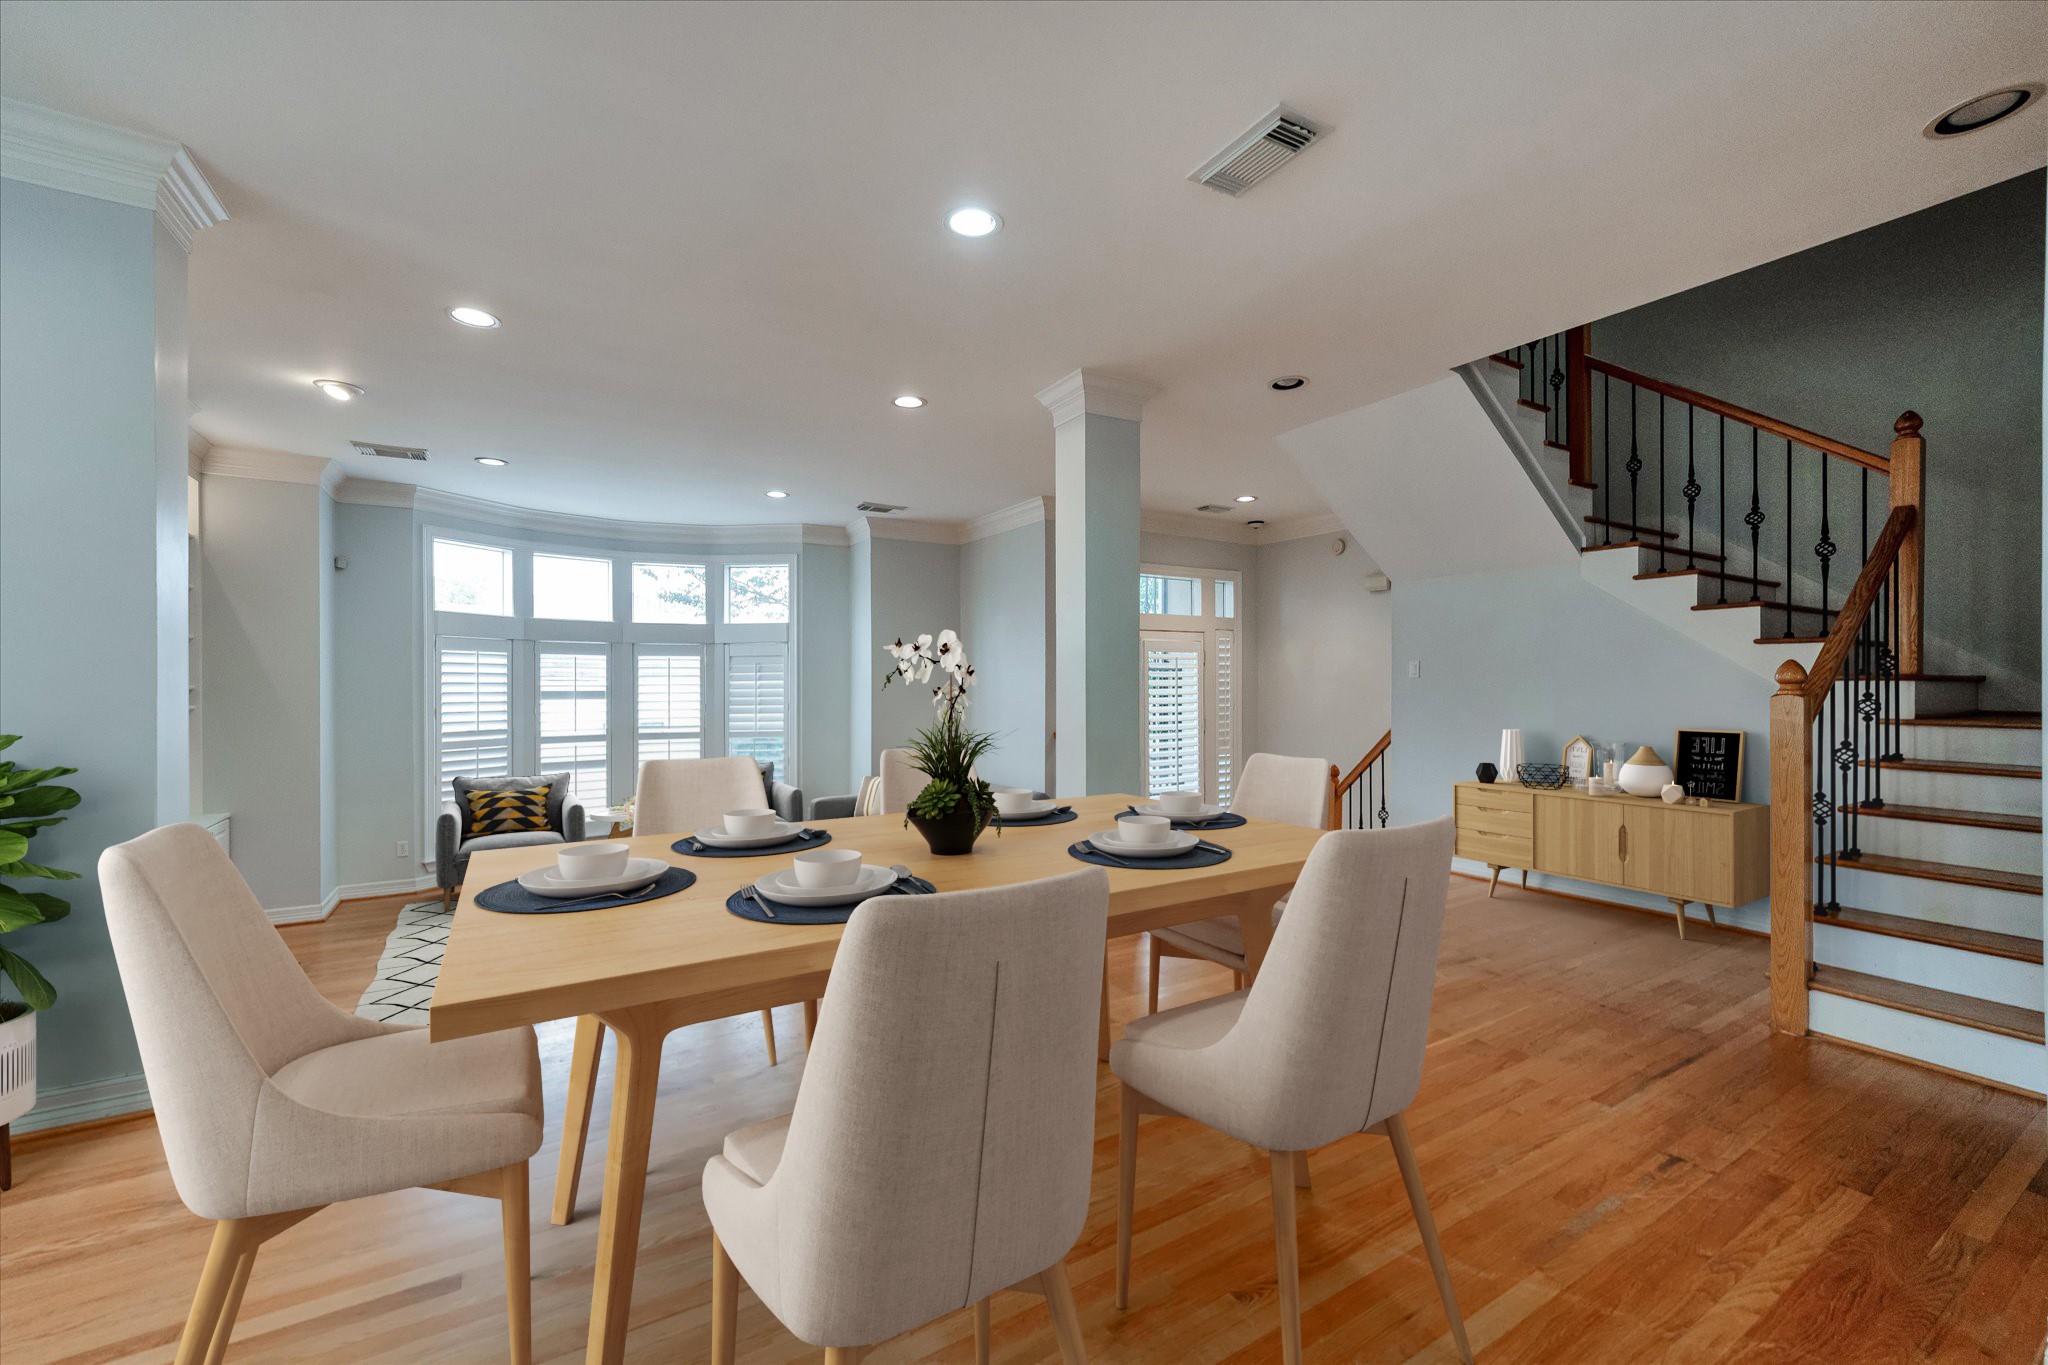 Looping back to the 2nd floor, here is a photo of your open dining room. This frame also shows how great the different areas of this floor flow together, and is perfect for entertaining friends and family!